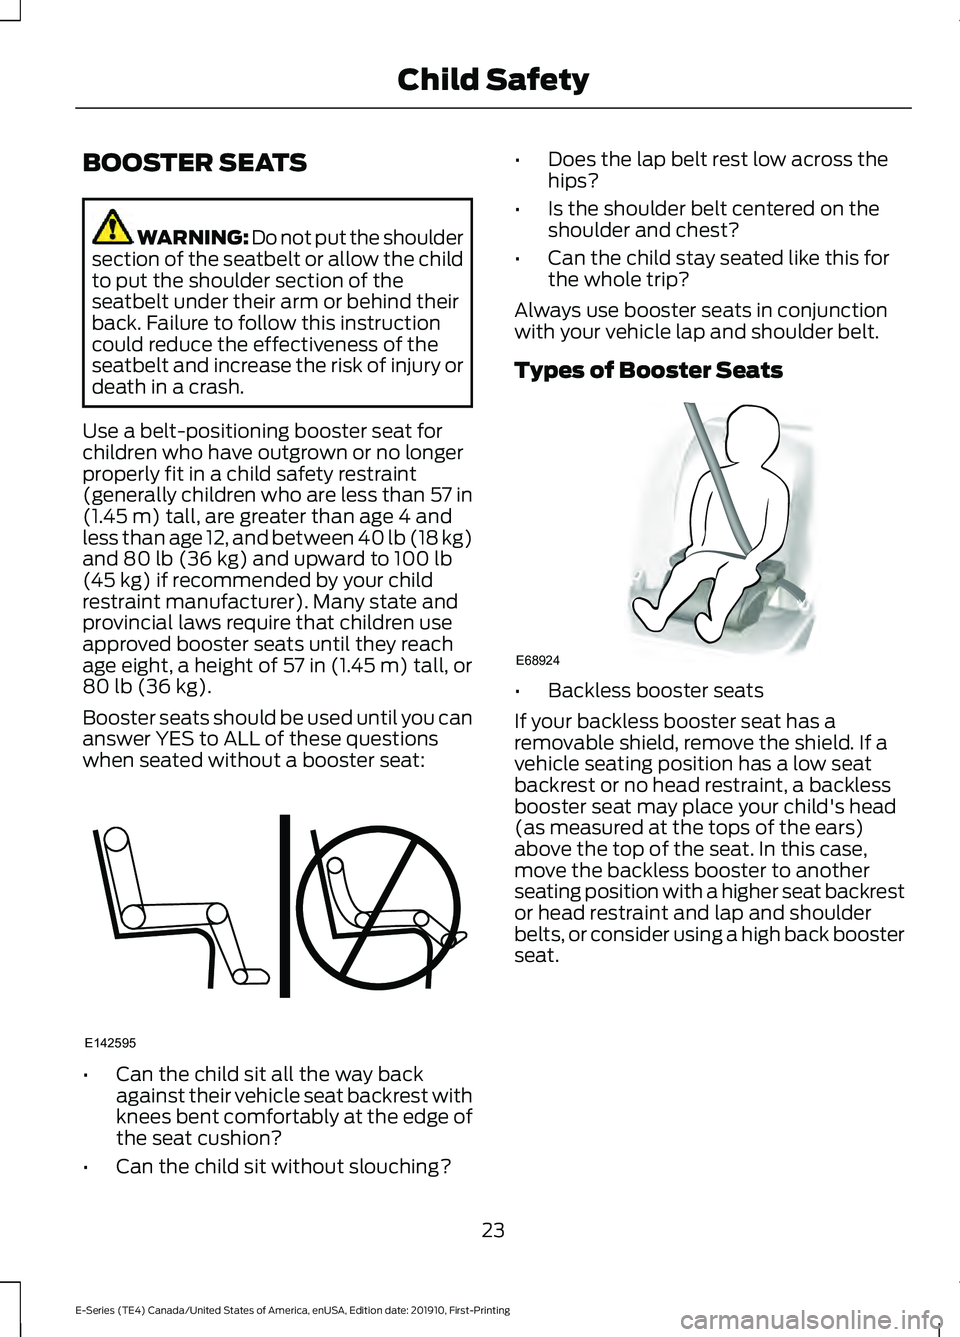 FORD E-450 2021 Owners Manual BOOSTER SEATS
WARNING: Do not put the shoulder
section of the seatbelt or allow the child
to put the shoulder section of the
seatbelt under their arm or behind their
back. Failure to follow this instr